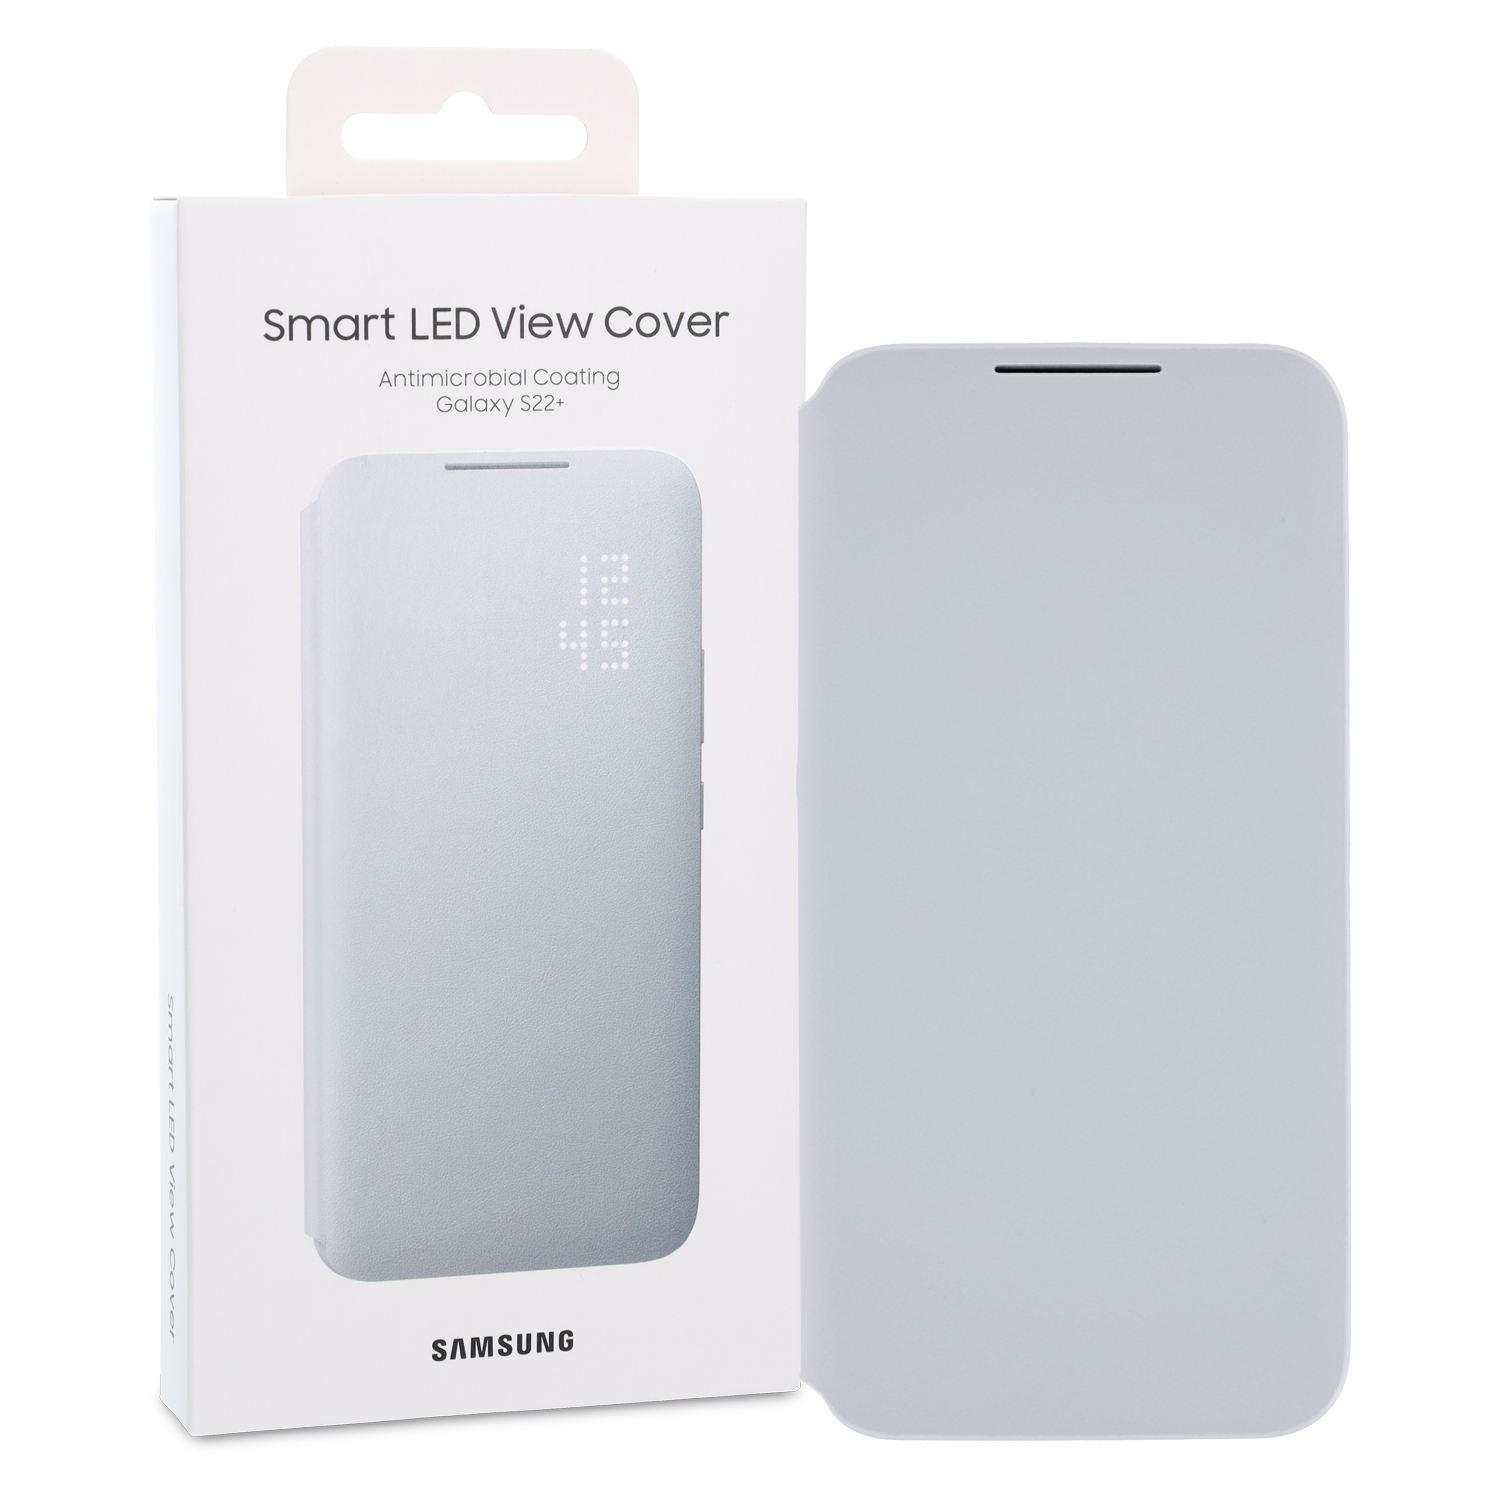 Samsung Galaxy S22+ 5G (S906B/DS) LED View Cover EF-NS906PJEGEE - Light Grey